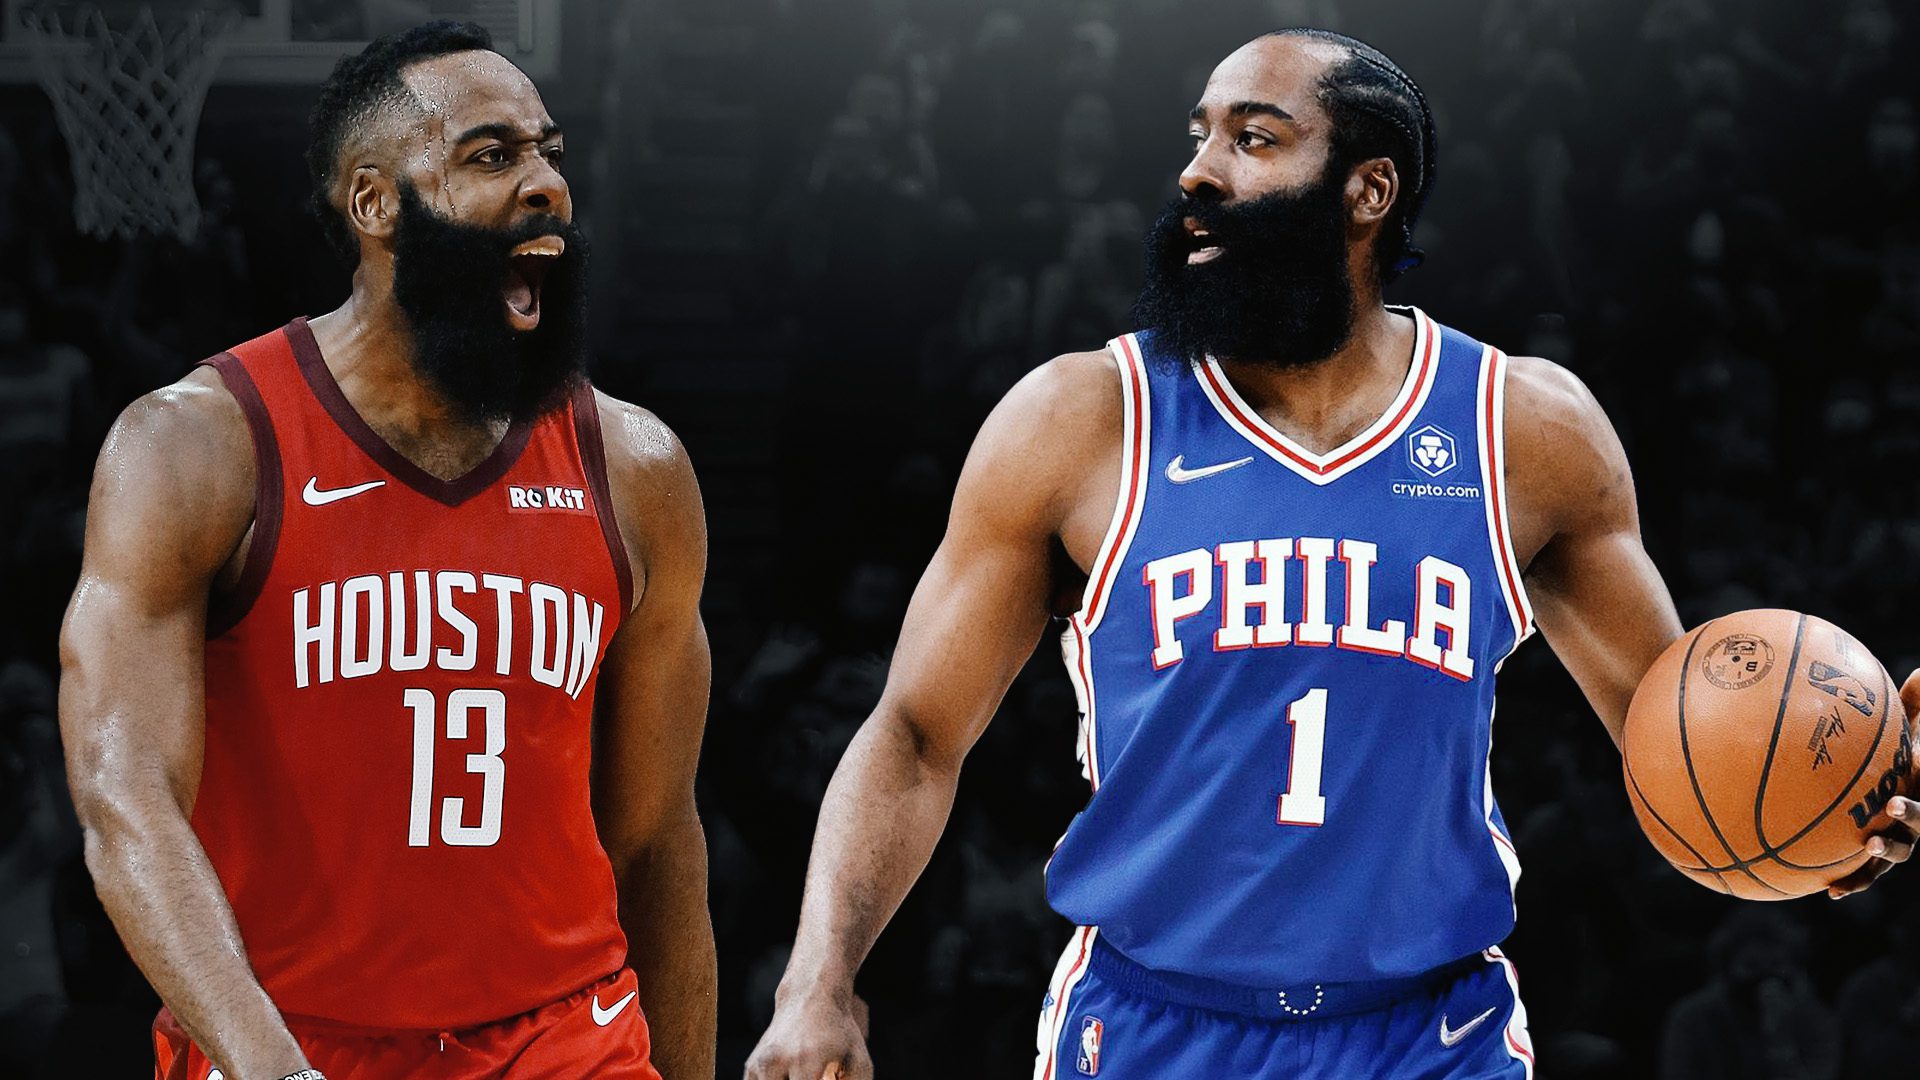 James Harden’s Future in 76ers ‘Very Unclear’, per NBA Insider